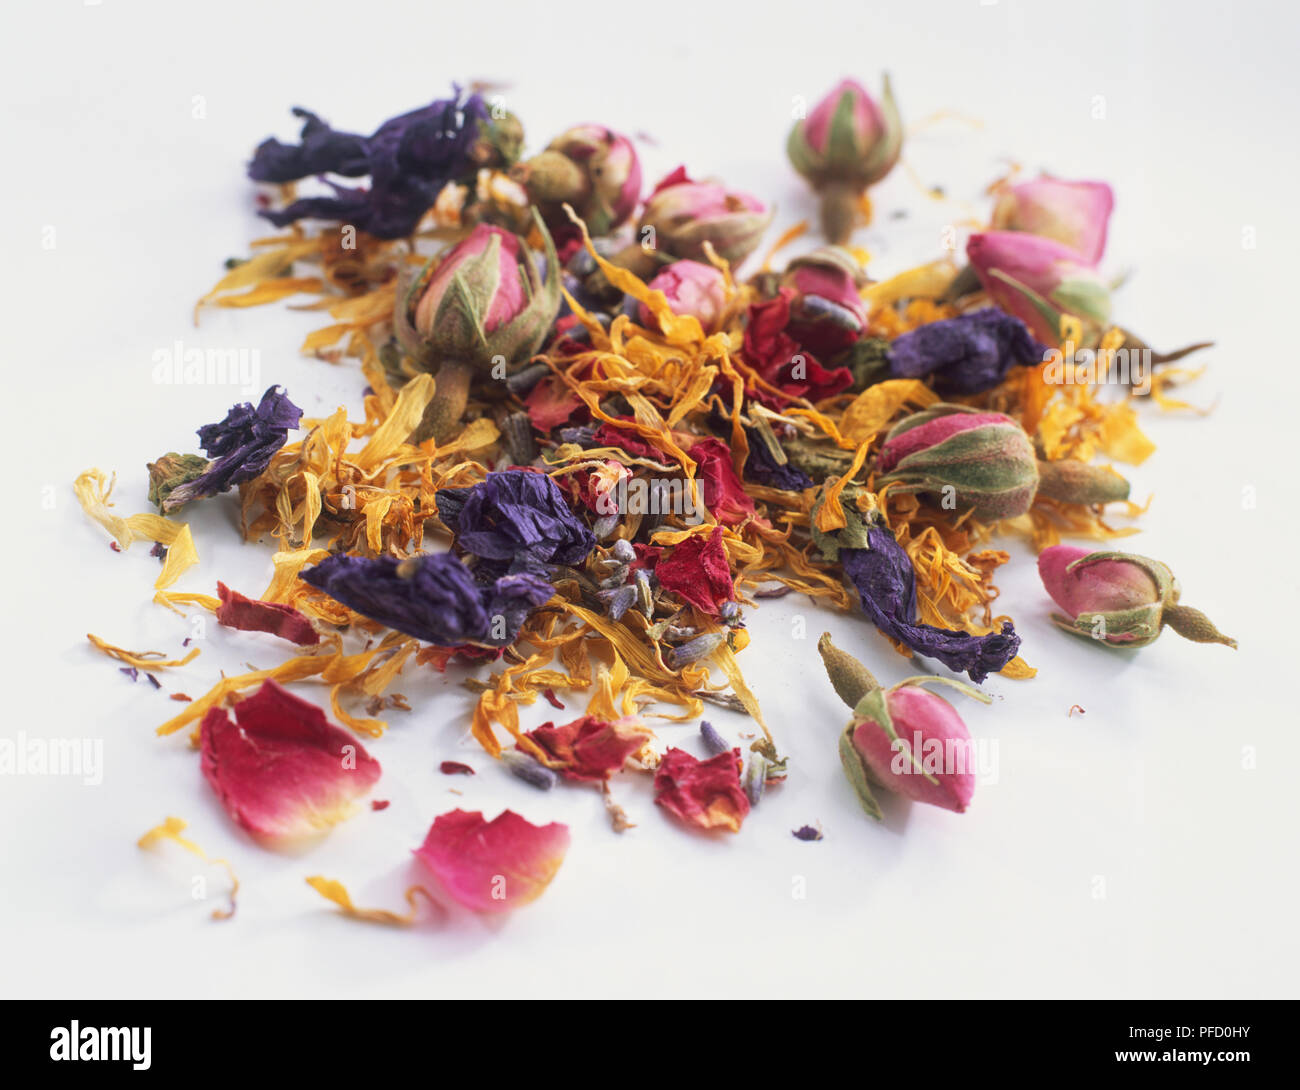 Crushed mixed dried flower petals Stock Photo - Alamy